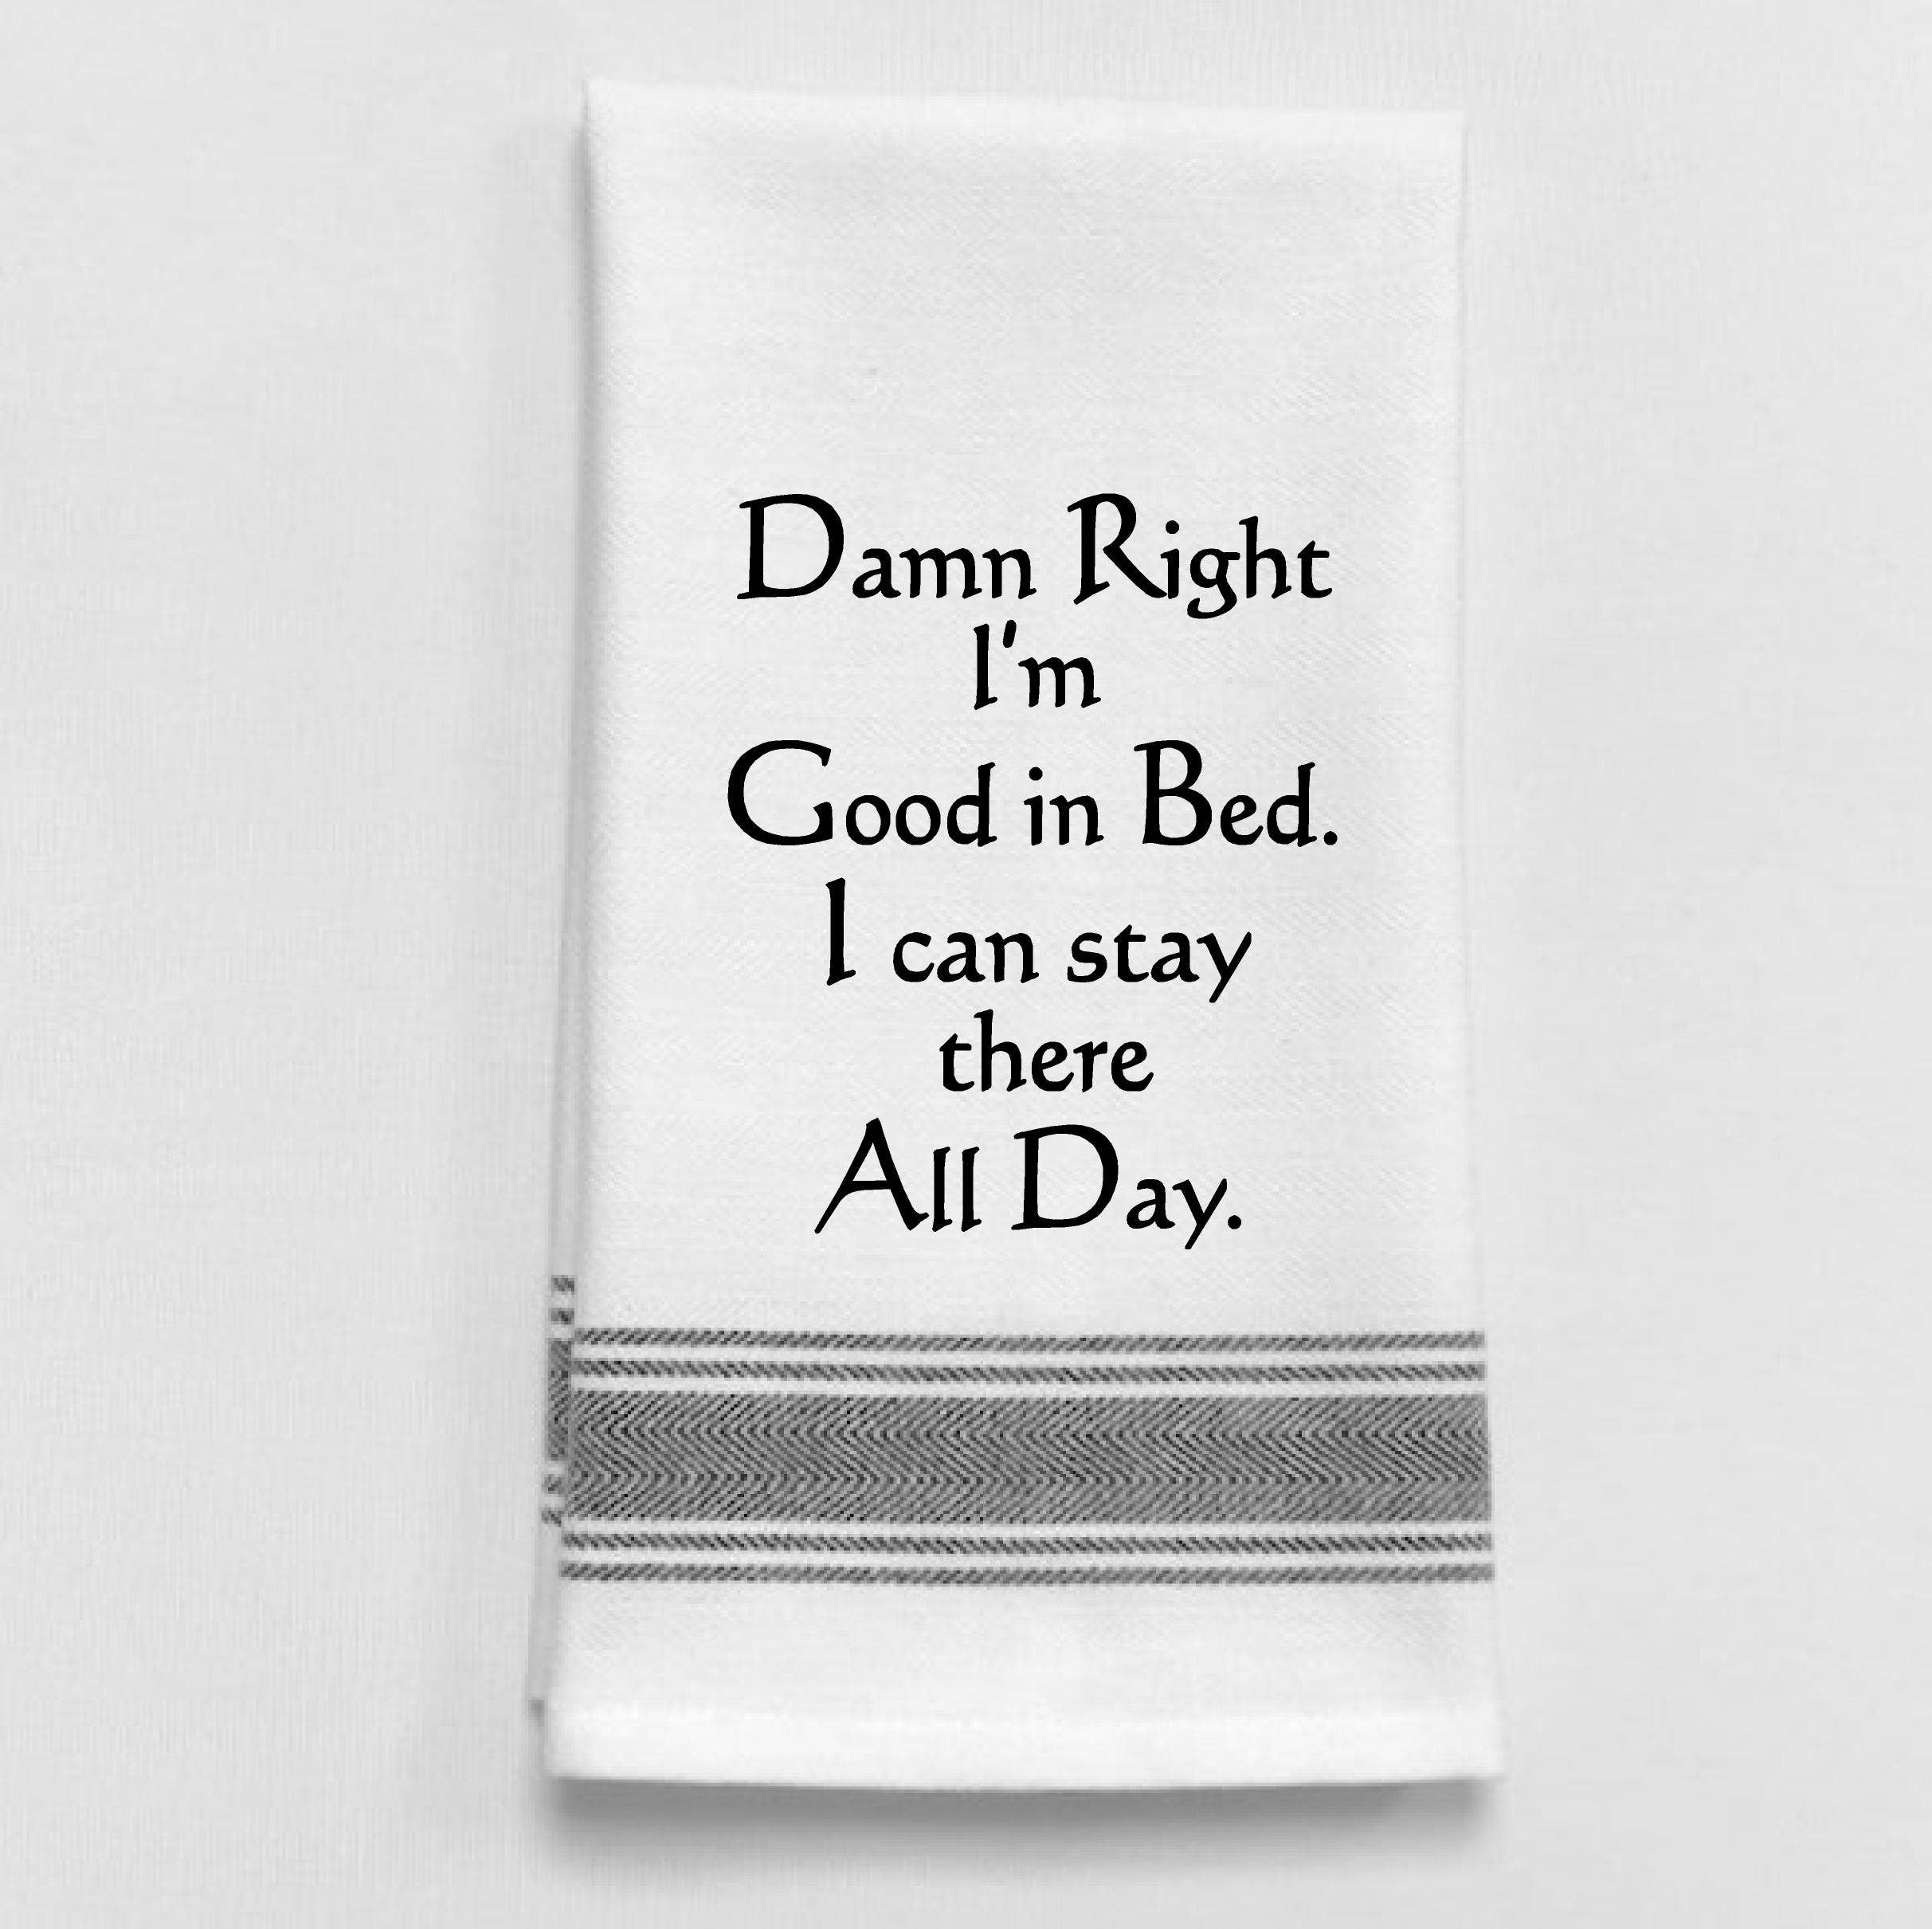  Damn right, I'm good in bed... - Coco and lulu boutique 